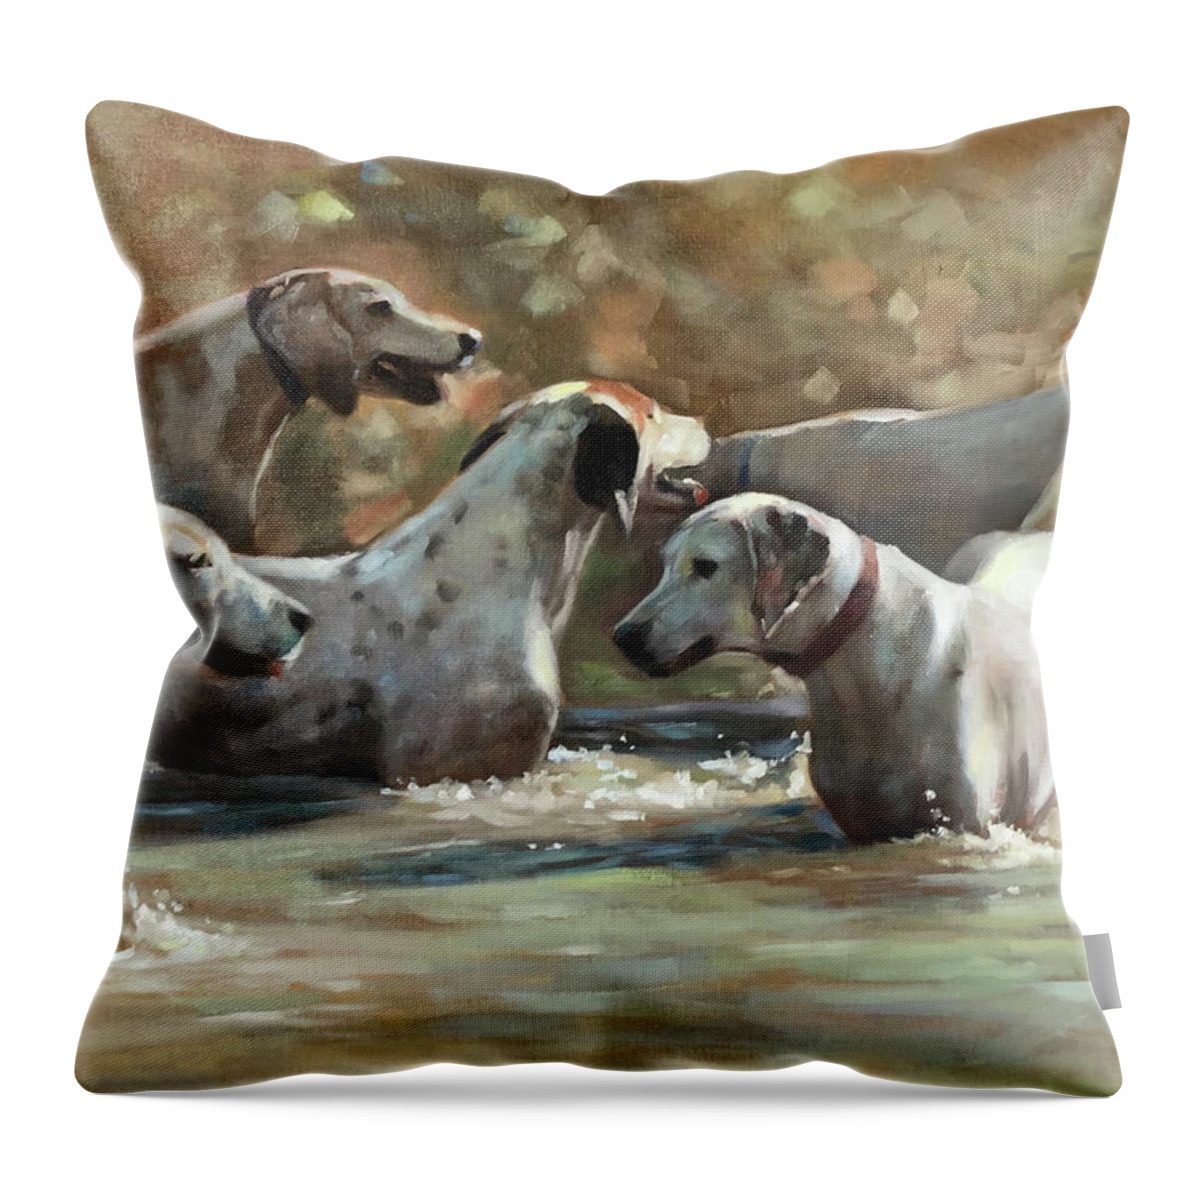 Hounds Dogs Dog Foxhunt Foxhounds Hunt Water Wading Playing Contemporary Art Painting Realism Throw Pillow featuring the painting Well Hello by Susan Bradbury